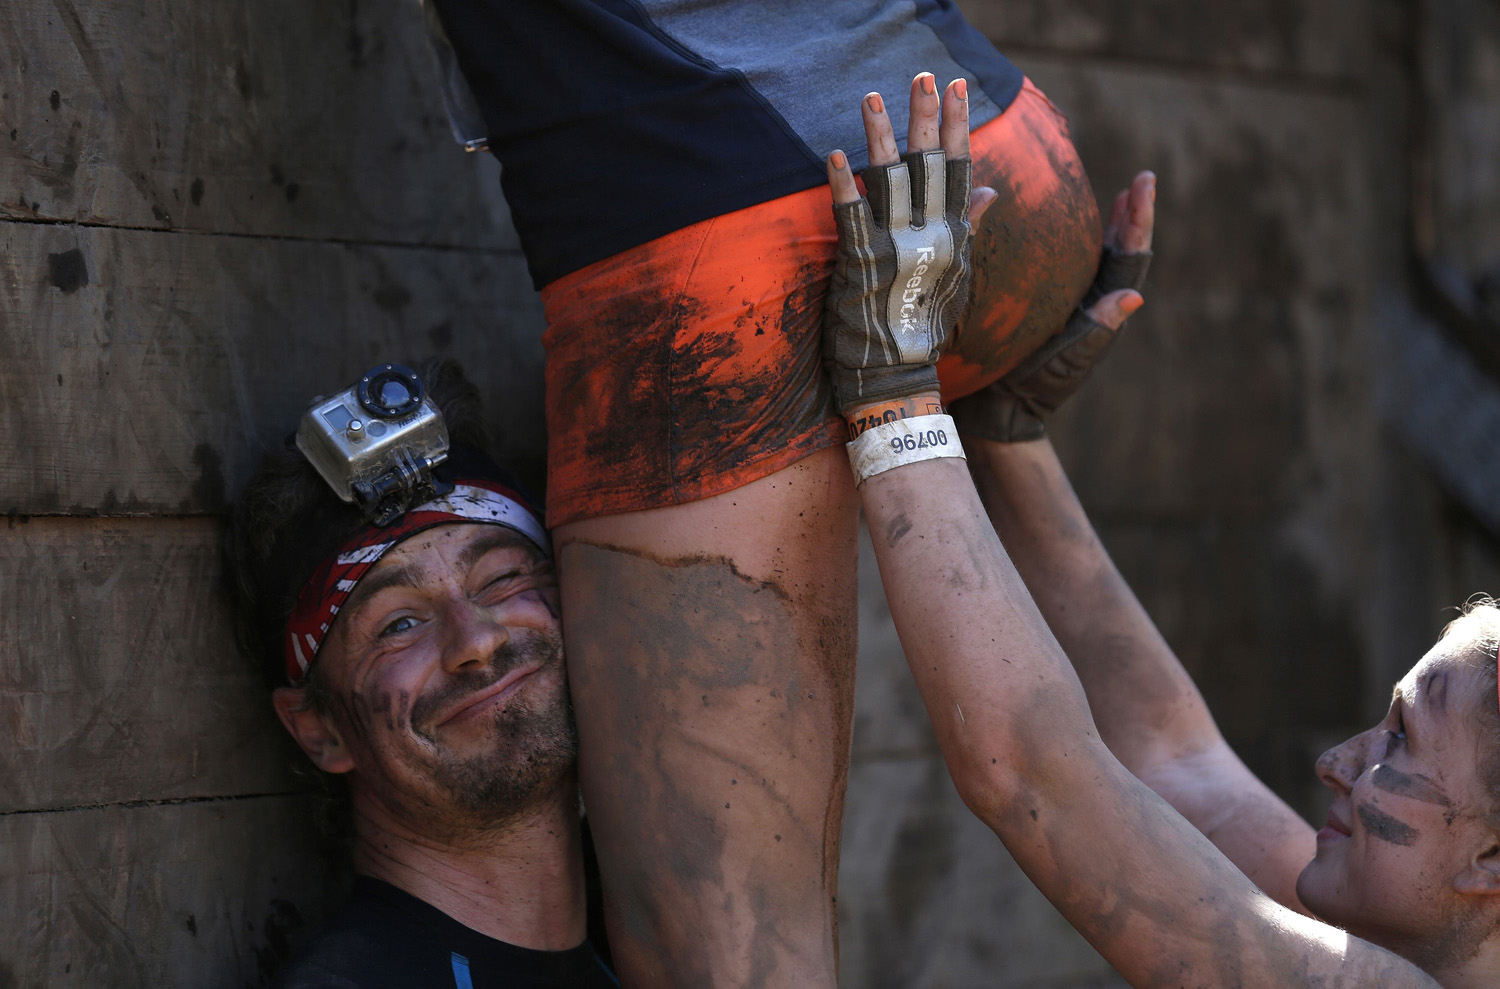 Participants climb over a wall at the  Tough Mudder  endurance event series in Arnsberg, Germany on Sept. 6, 2014.